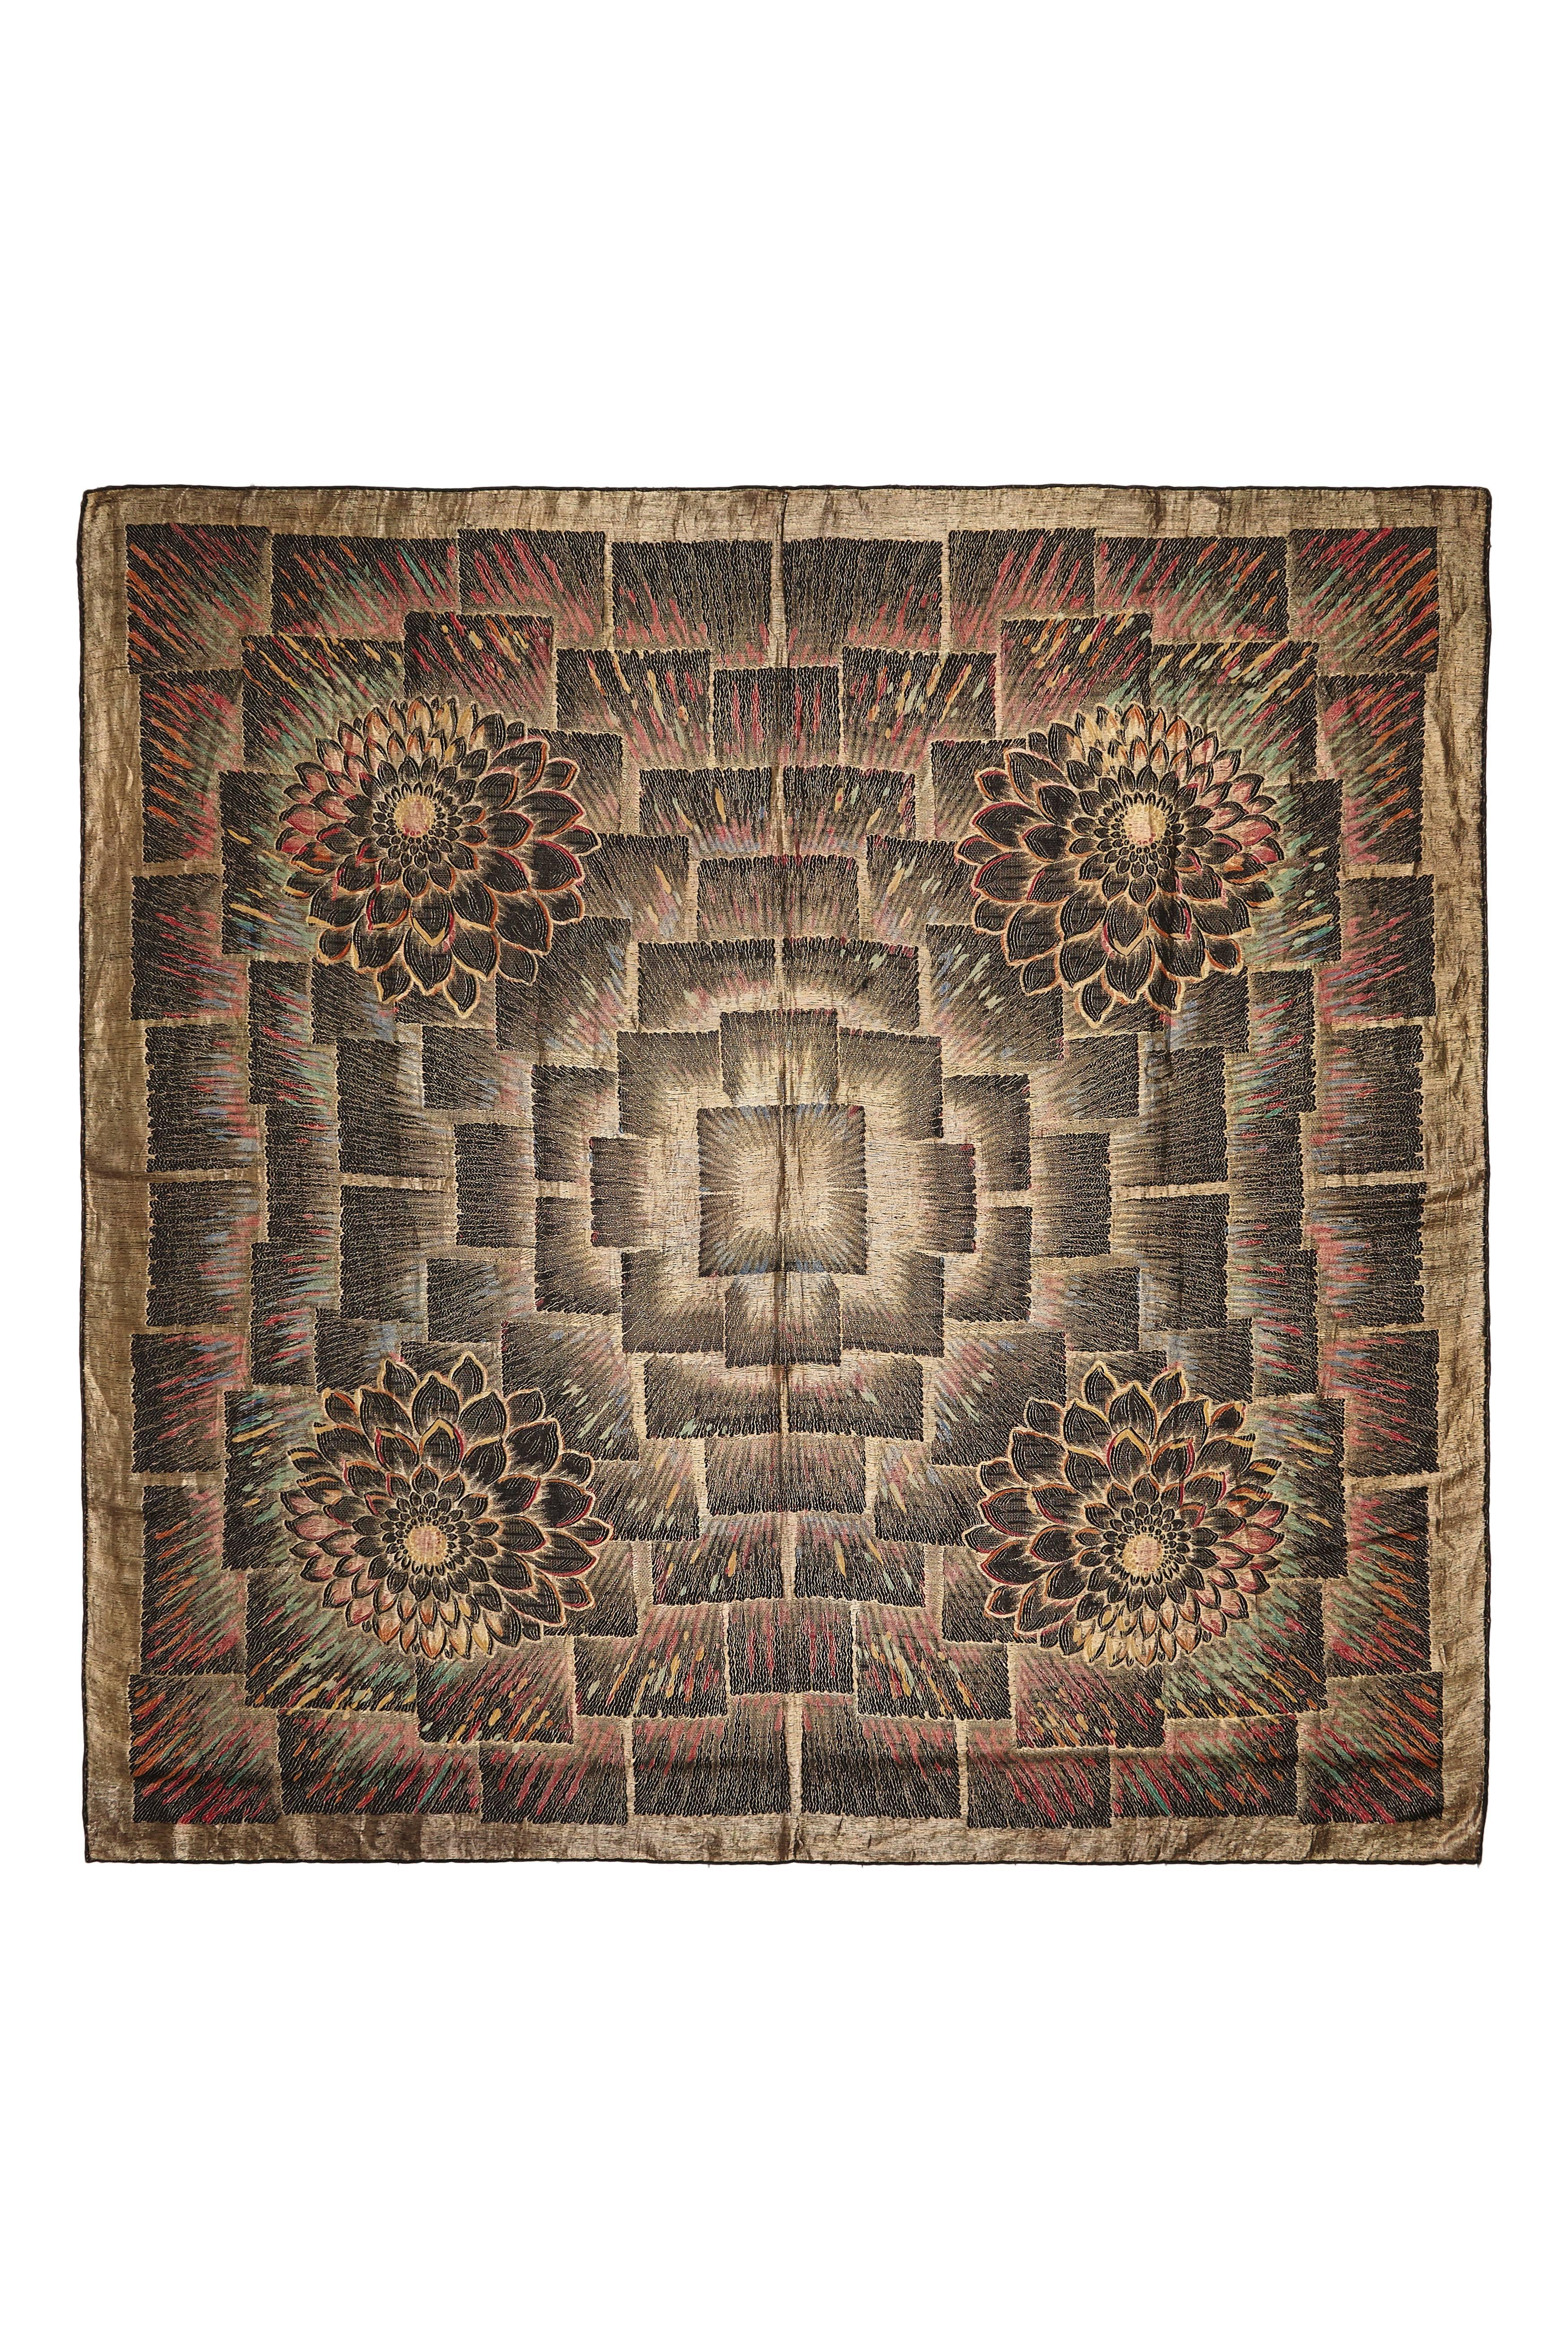 Stunning vintage 1920s square lame scarf in gold and black with flicks of blue, red and green.  This beautiful piece is made up of a pattern of squares with four large floral motifs in each corner.  It is large in size measuring 130cm x 130cm/ 51” x